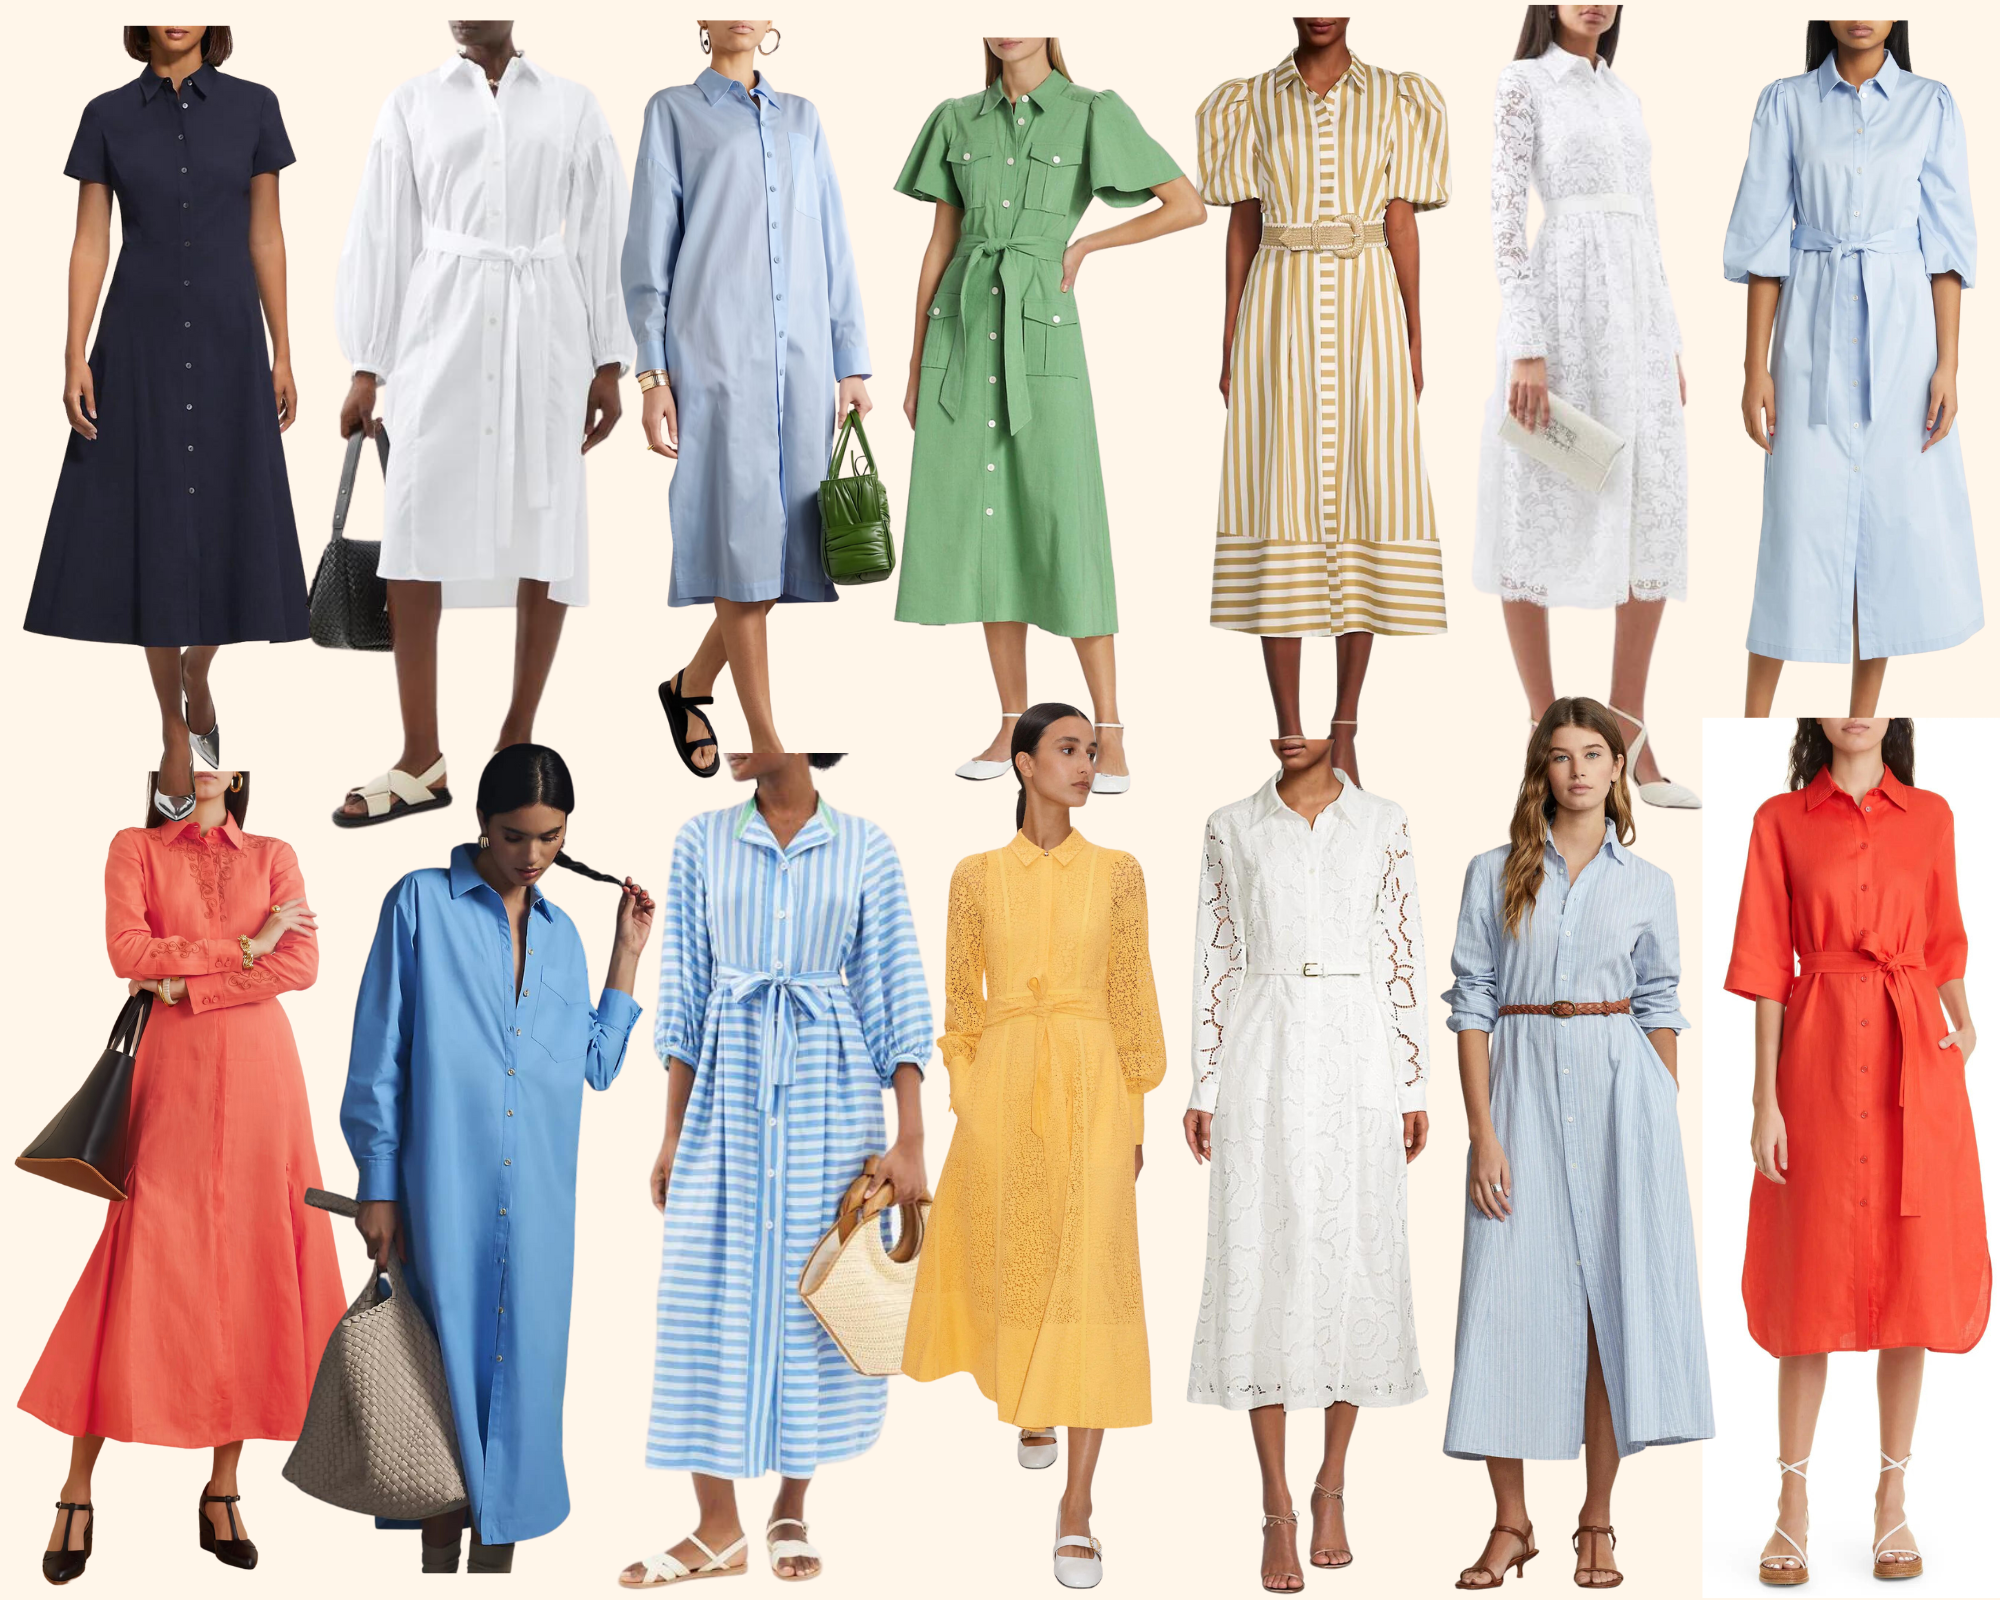 Habitually Chic® » 31 Chic Shirt Dresses for Warmer Weather